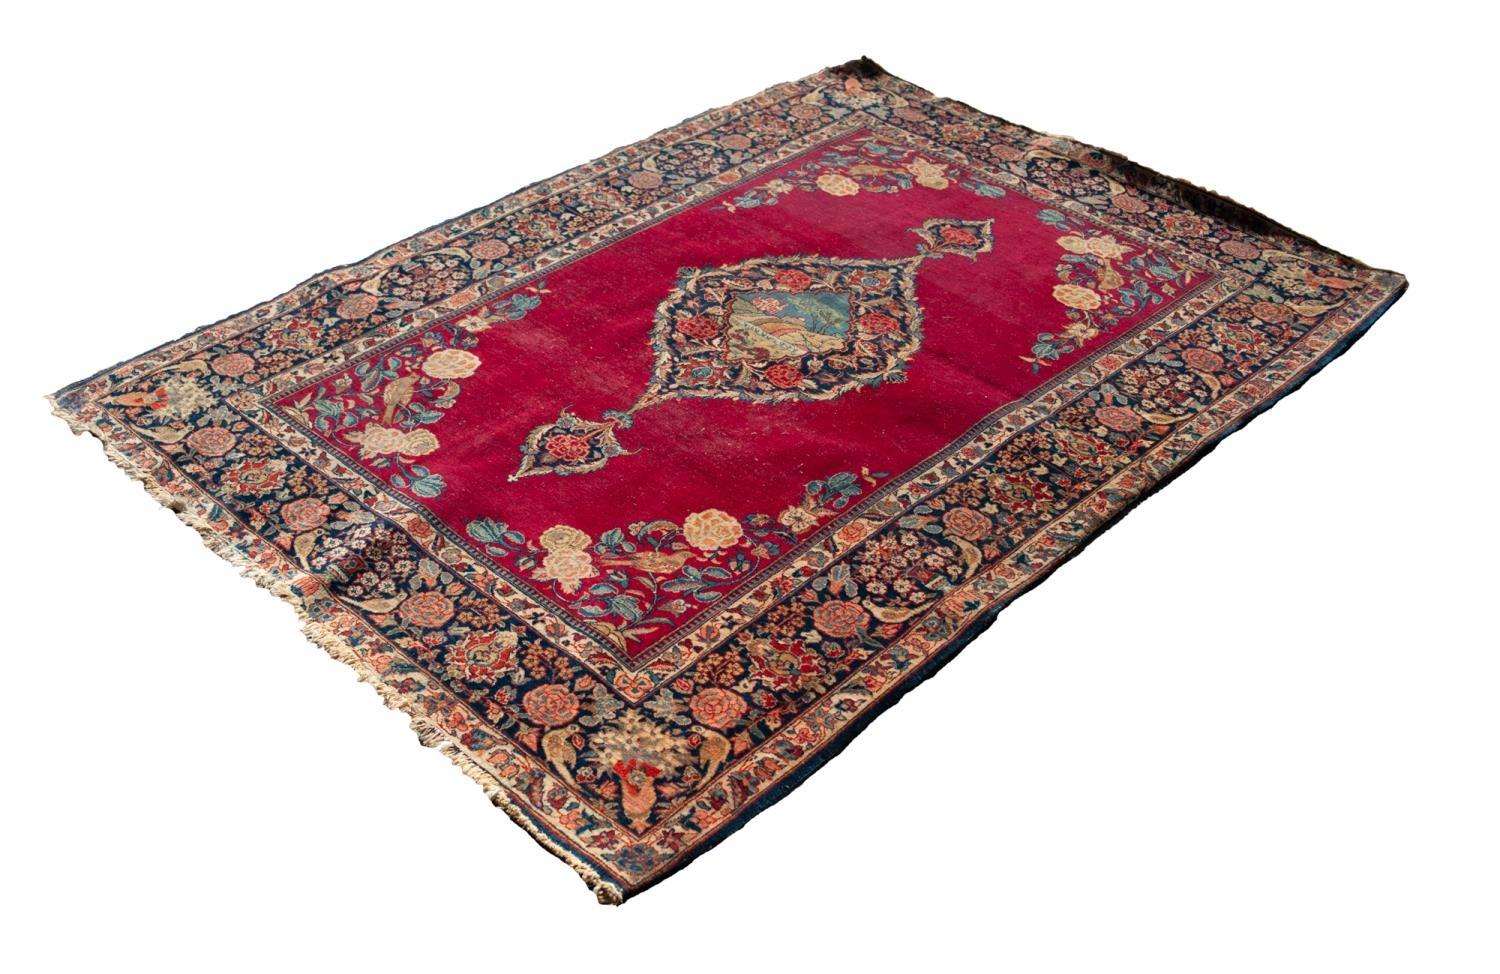 KIRMAN PERSIAN RUG, the large lozenge shaped medallion with pendants and decorated in a central